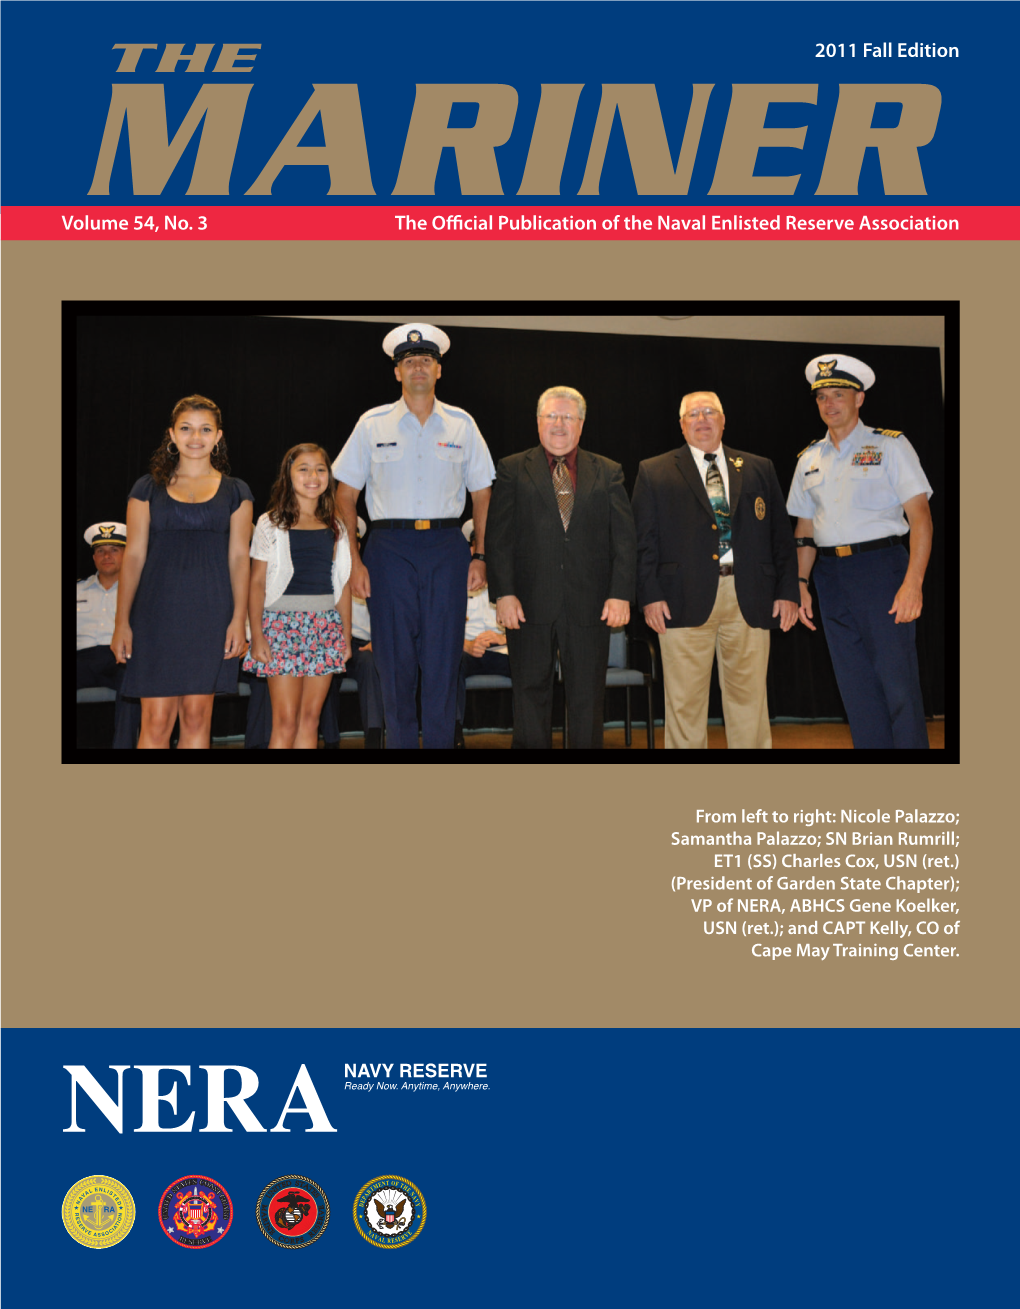 Volume 54, No. 3 the Official Publication of the Naval Enlisted Reserve Association